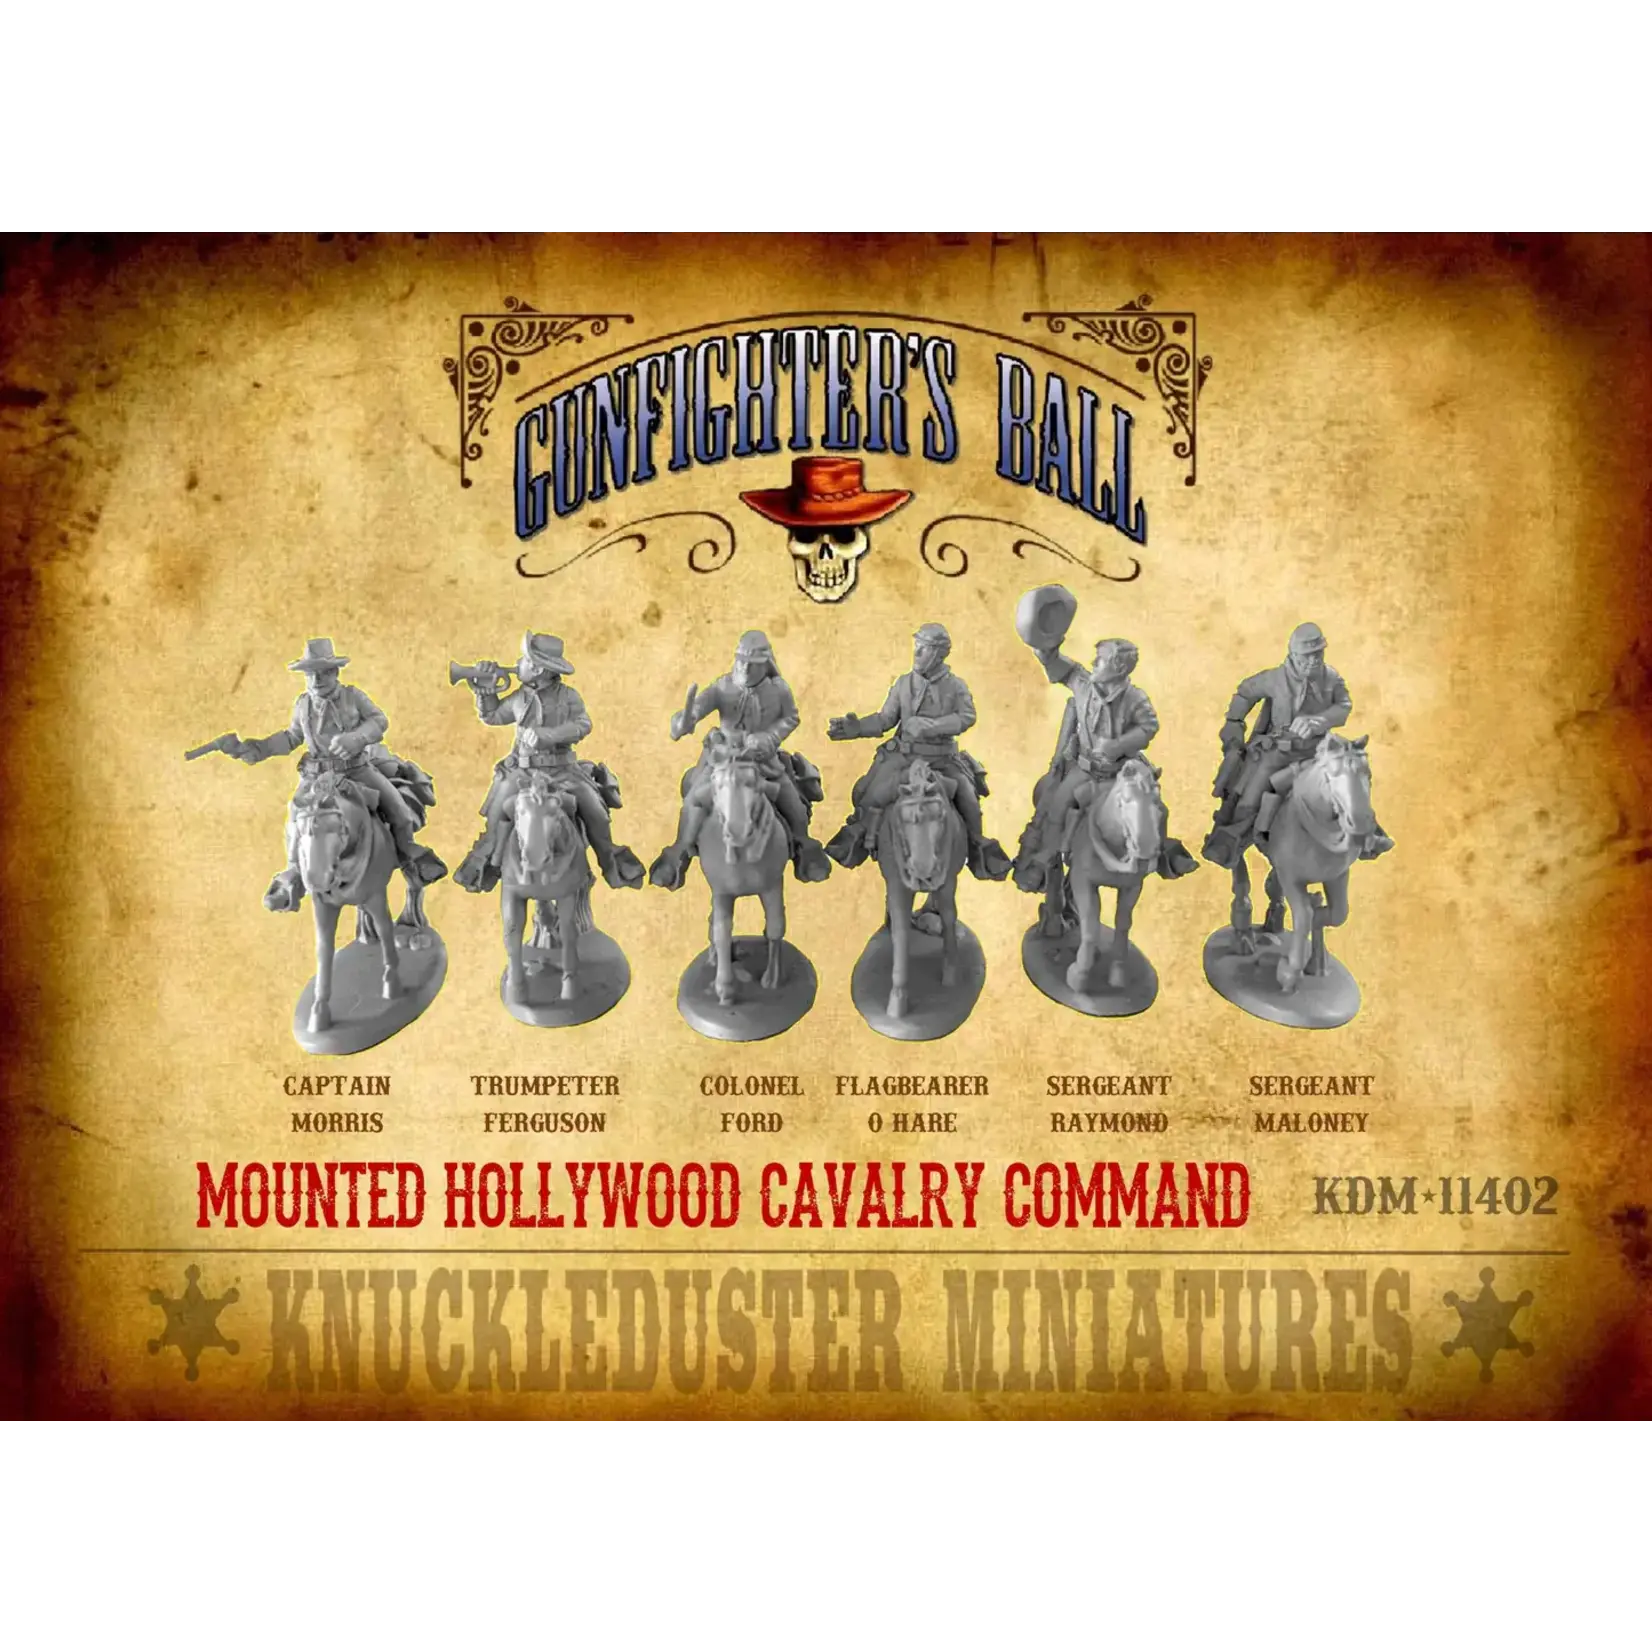 Knuckleduster Miniatures Mounted Hollywood Cavalry Command